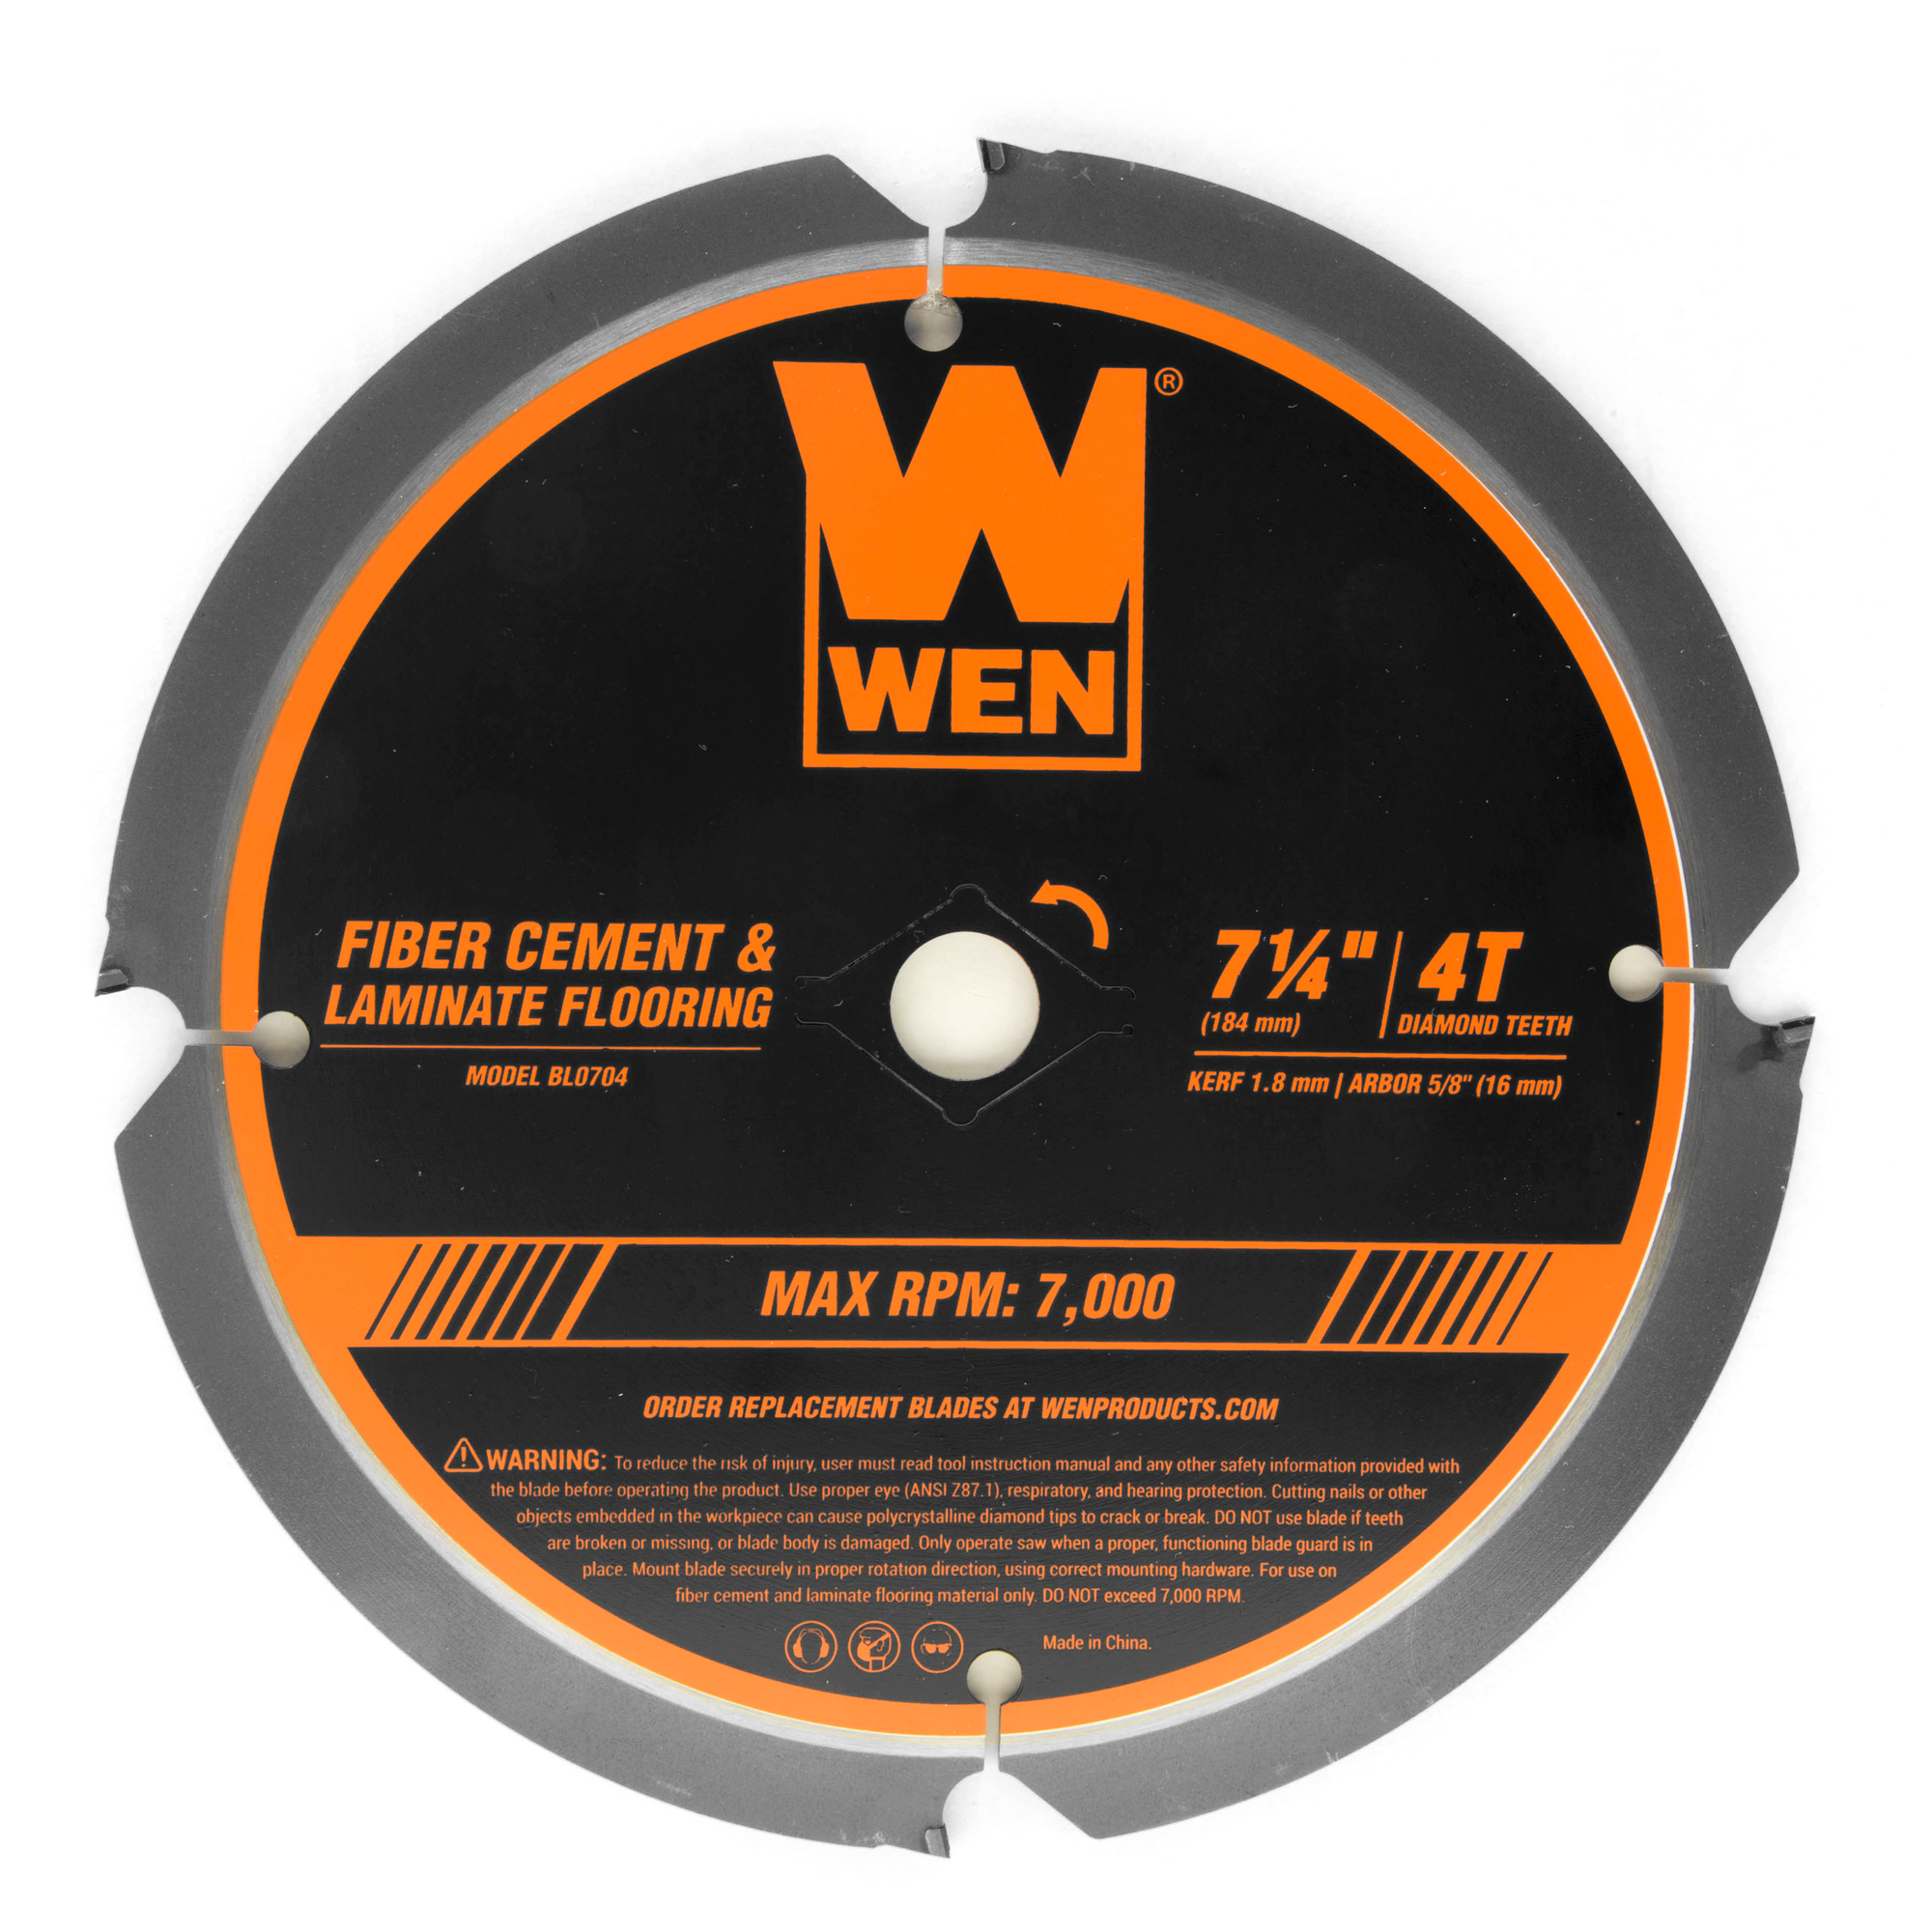 WEN, 7-1/4Inch 4-Tooth Diamond-Tipped Circular Saw Blade, Blade Diameter 7 1/4 in, Included (qty.) 1, Model BL0704